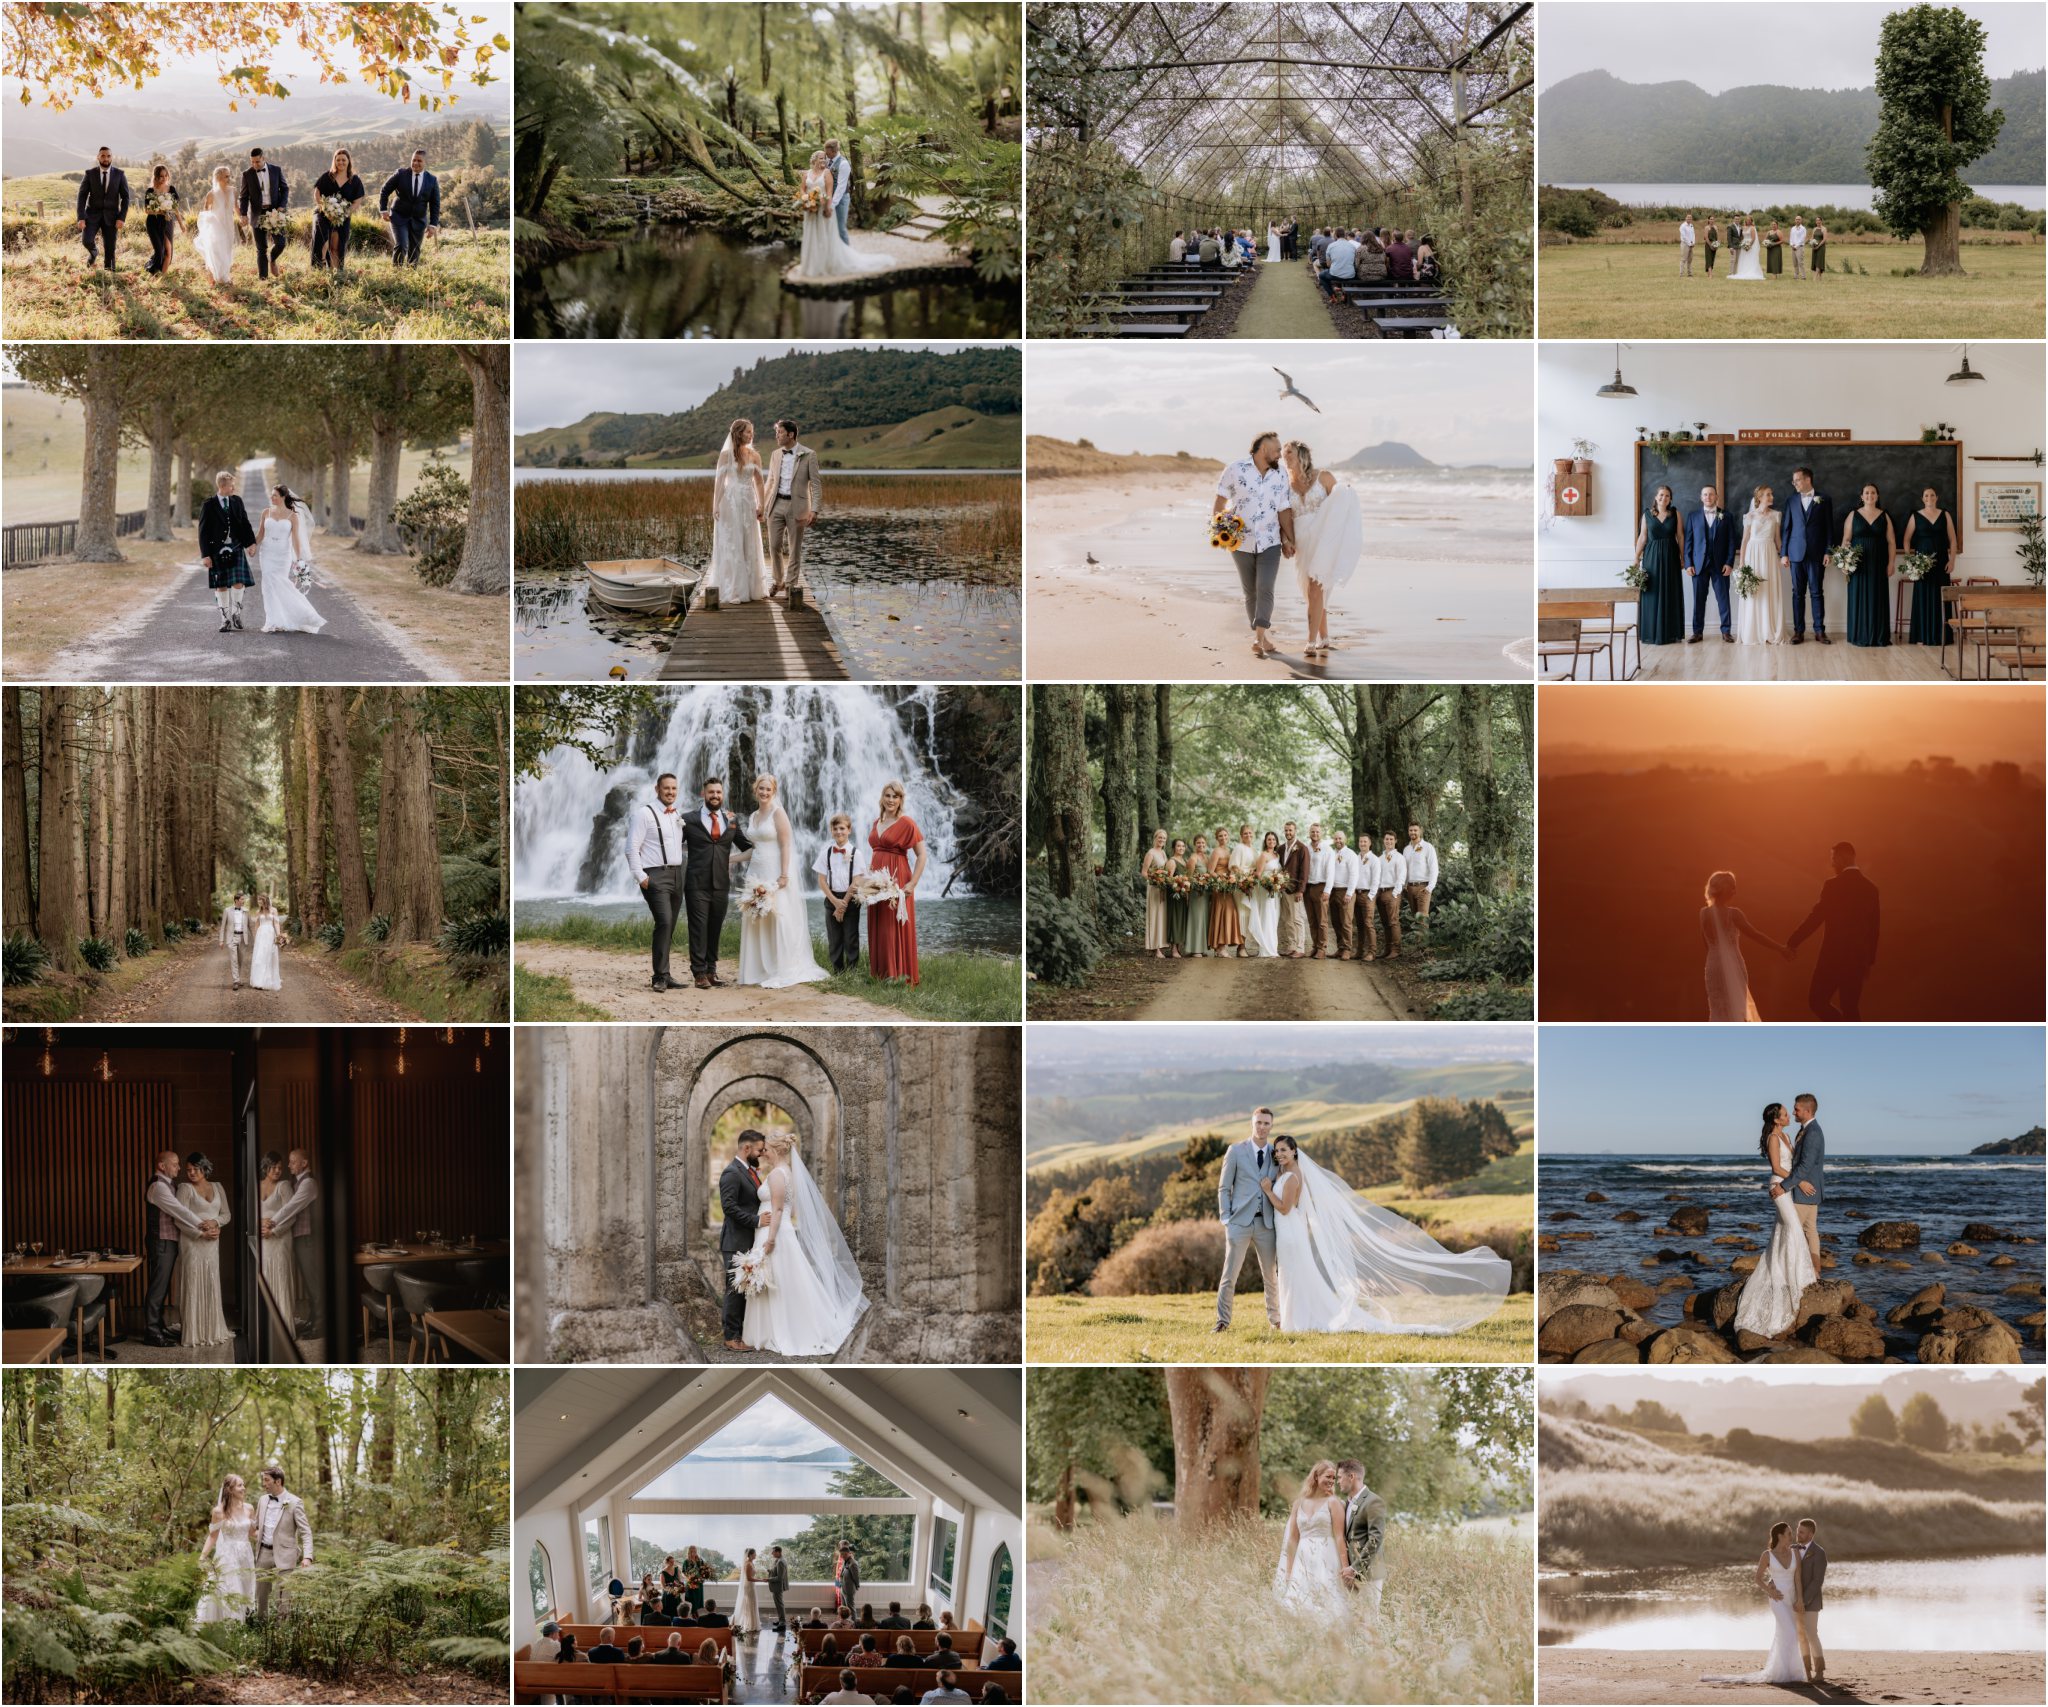 Images of New Zealand Wedding Venues